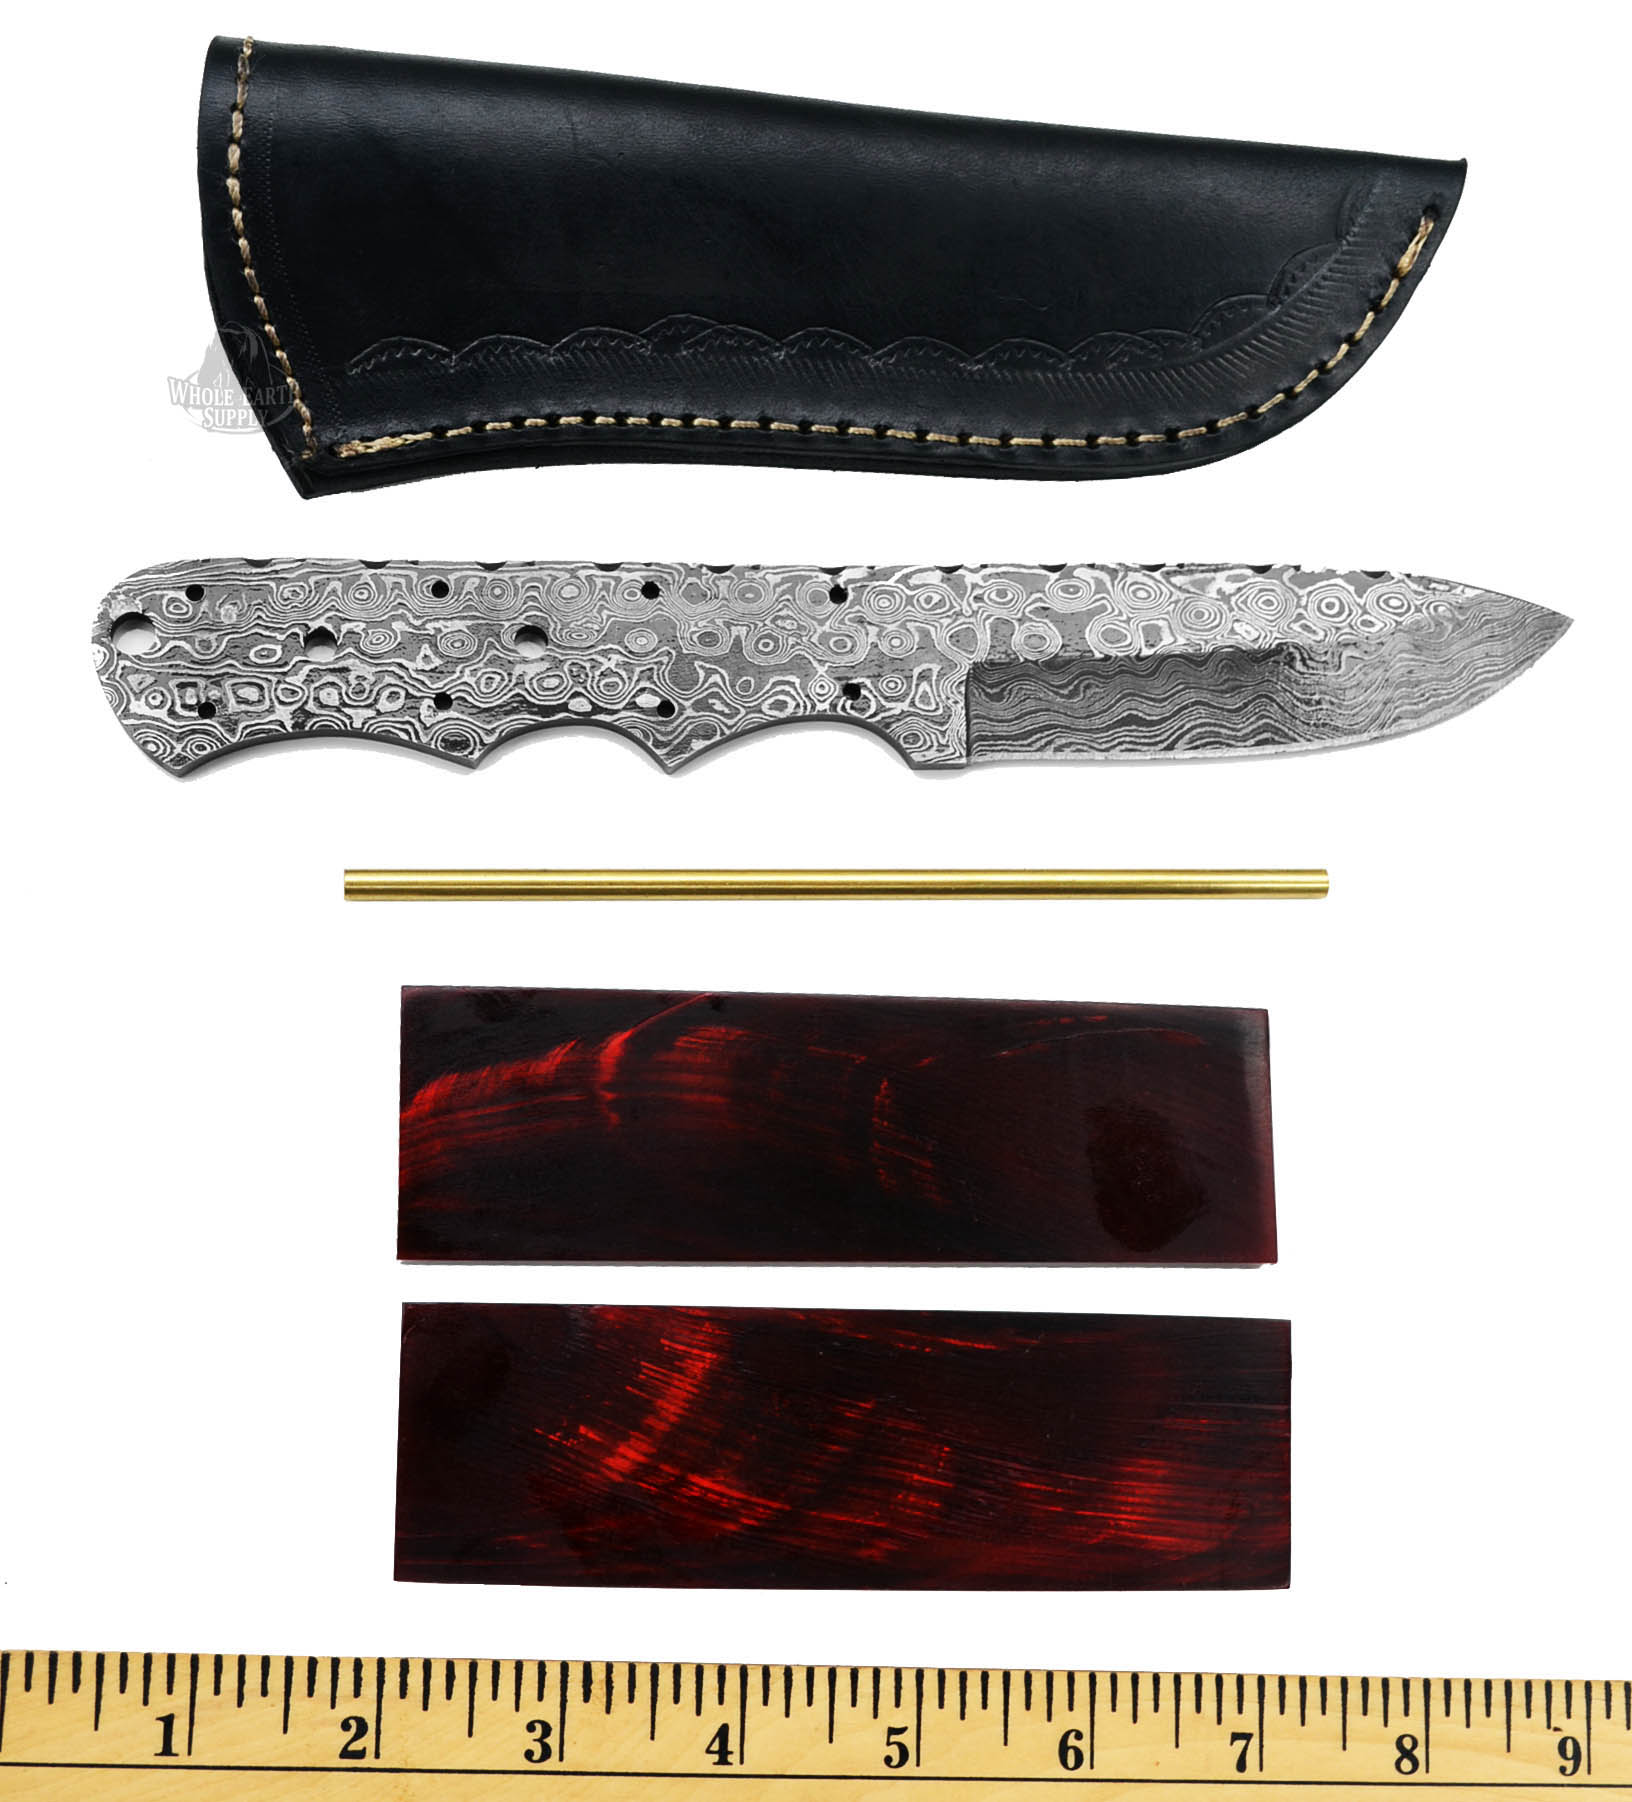 (Knife Kit) Build Your Own Damascus Drop Point Knife with Black & Red Buffalo Horn Handles and Mosaic Pin Combo Blank Hunting